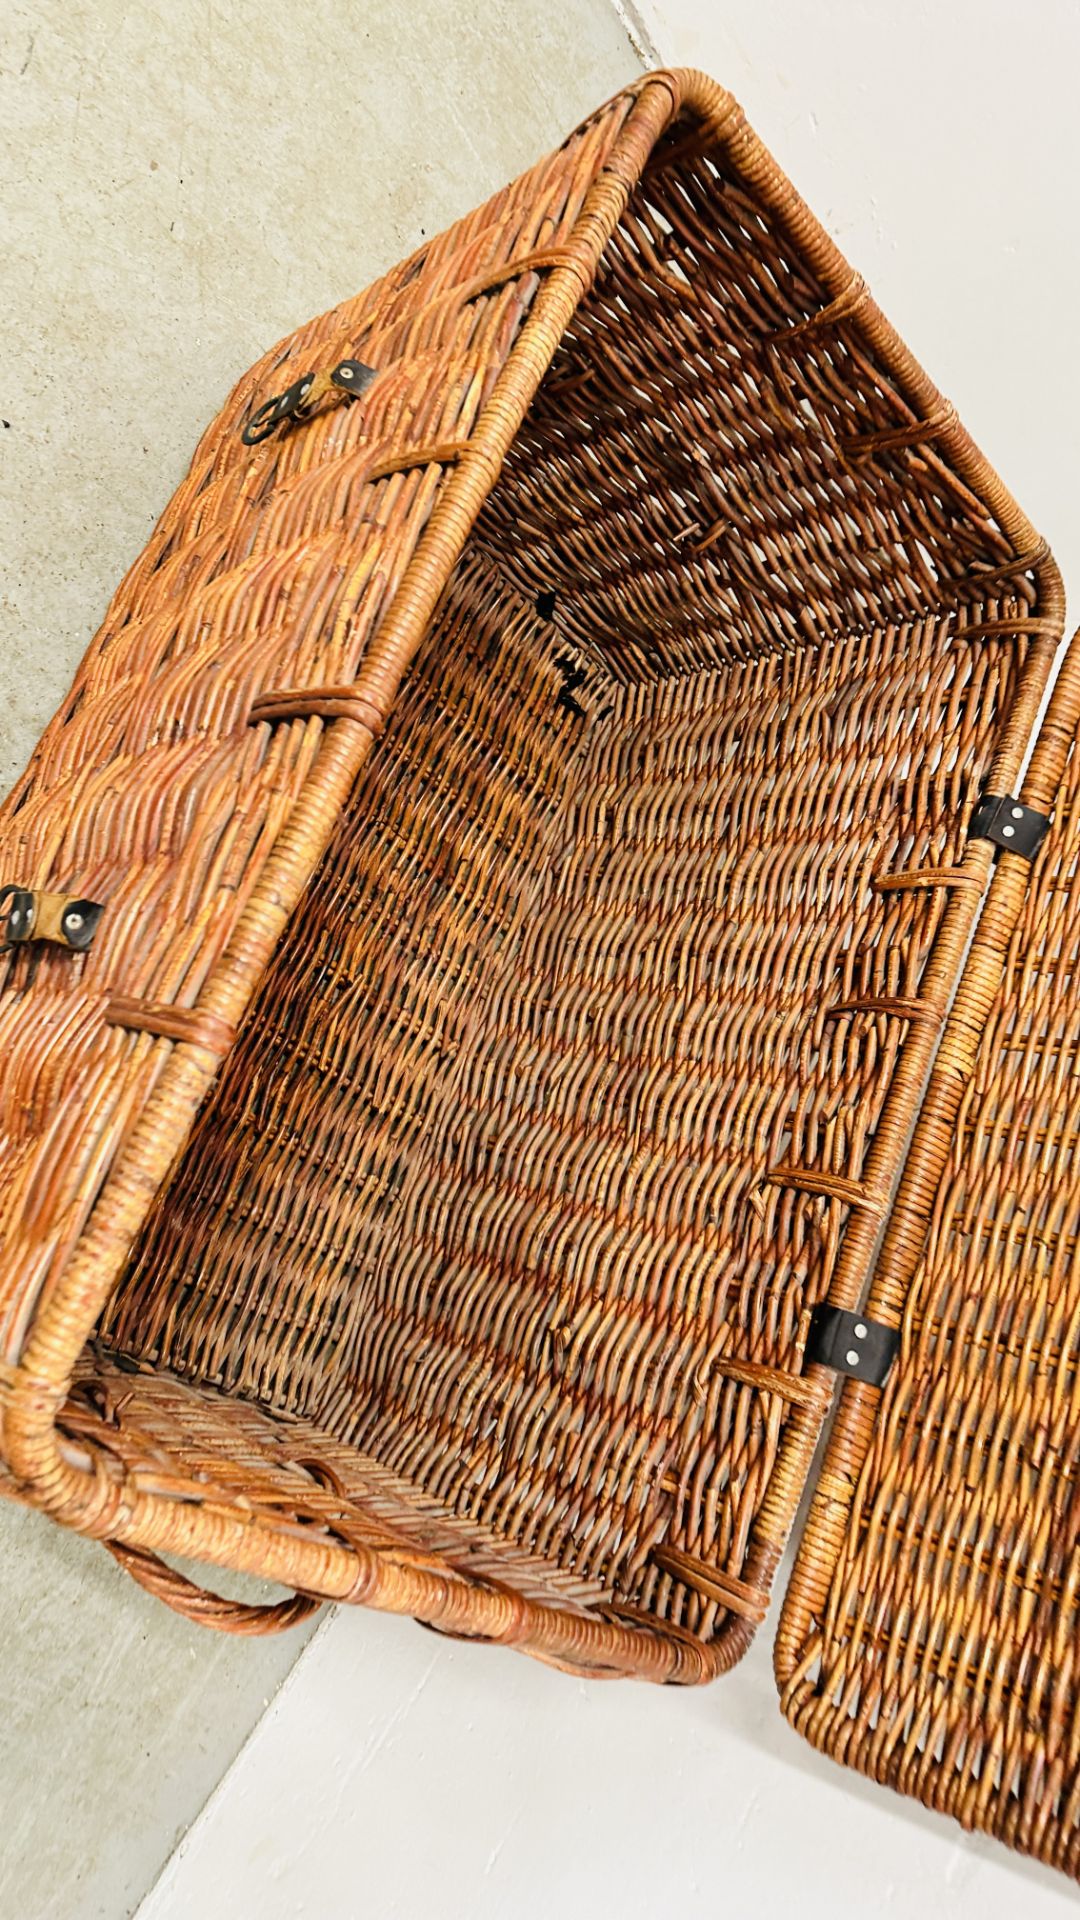 A LARGE WICKER TWO HANDLED BASKET - W 90 X D 55 X H 55CM. - Image 6 of 7